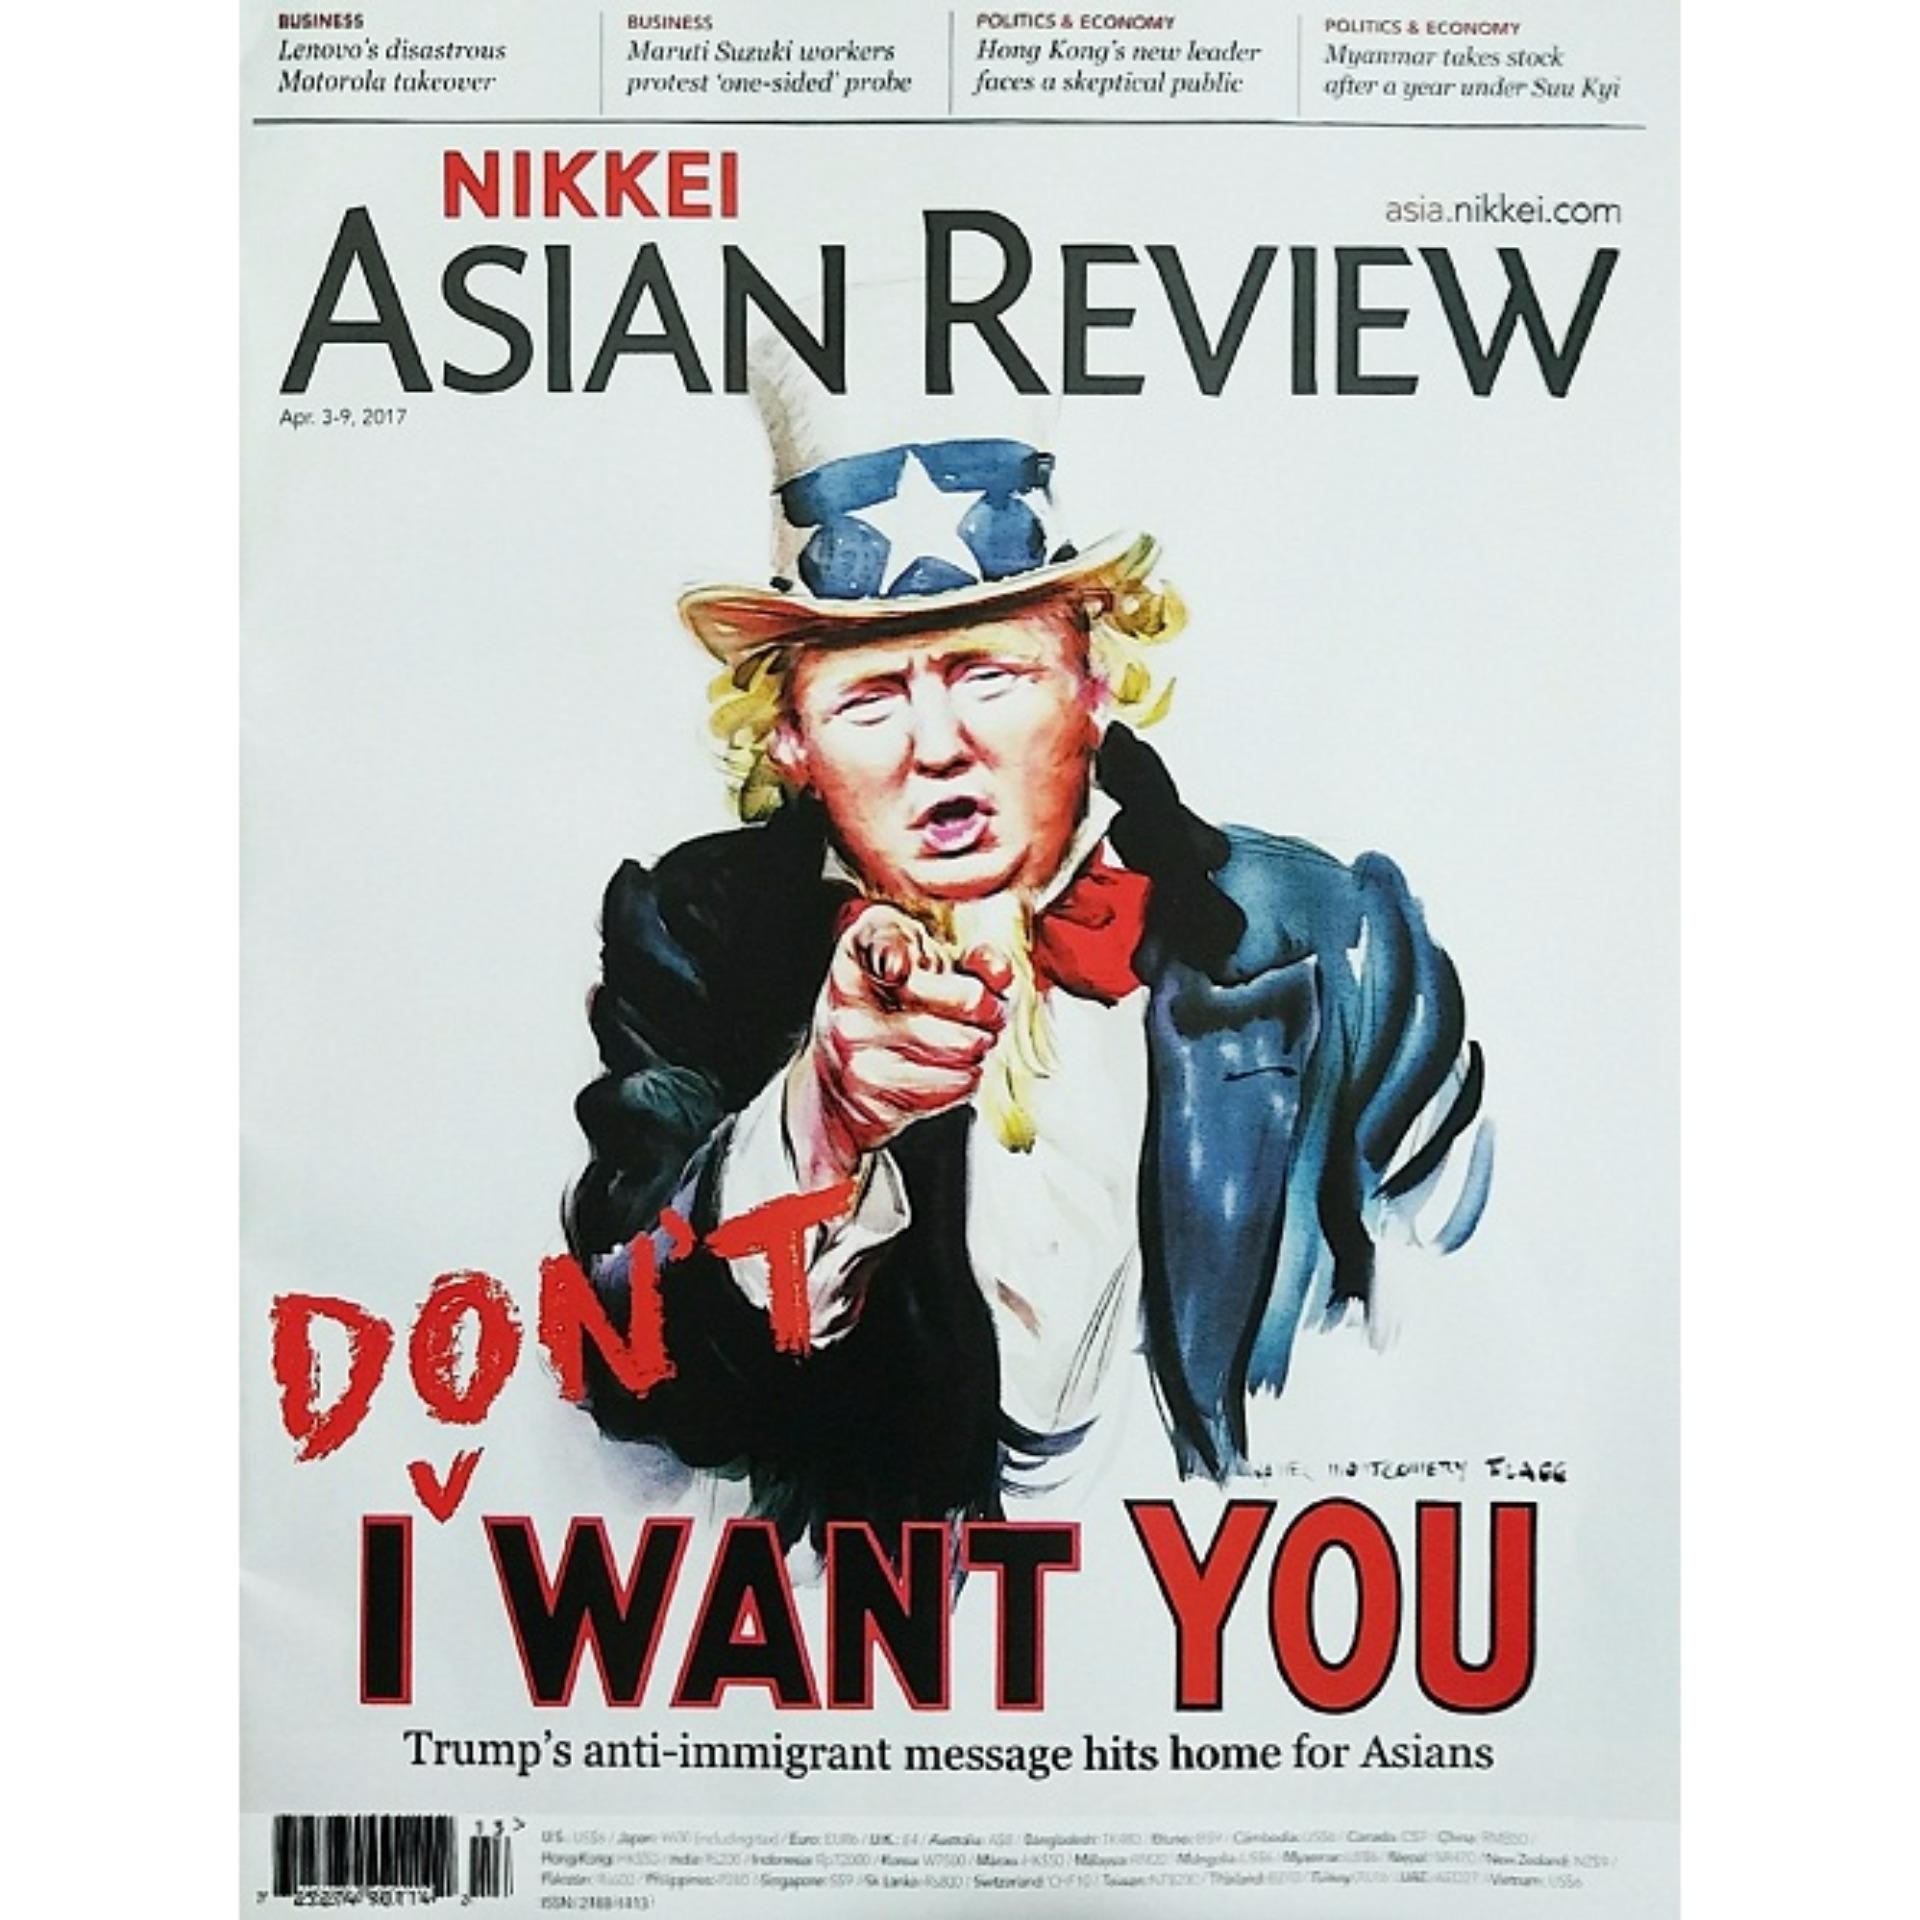 Nikkei Asian Review: 13- I don't want you